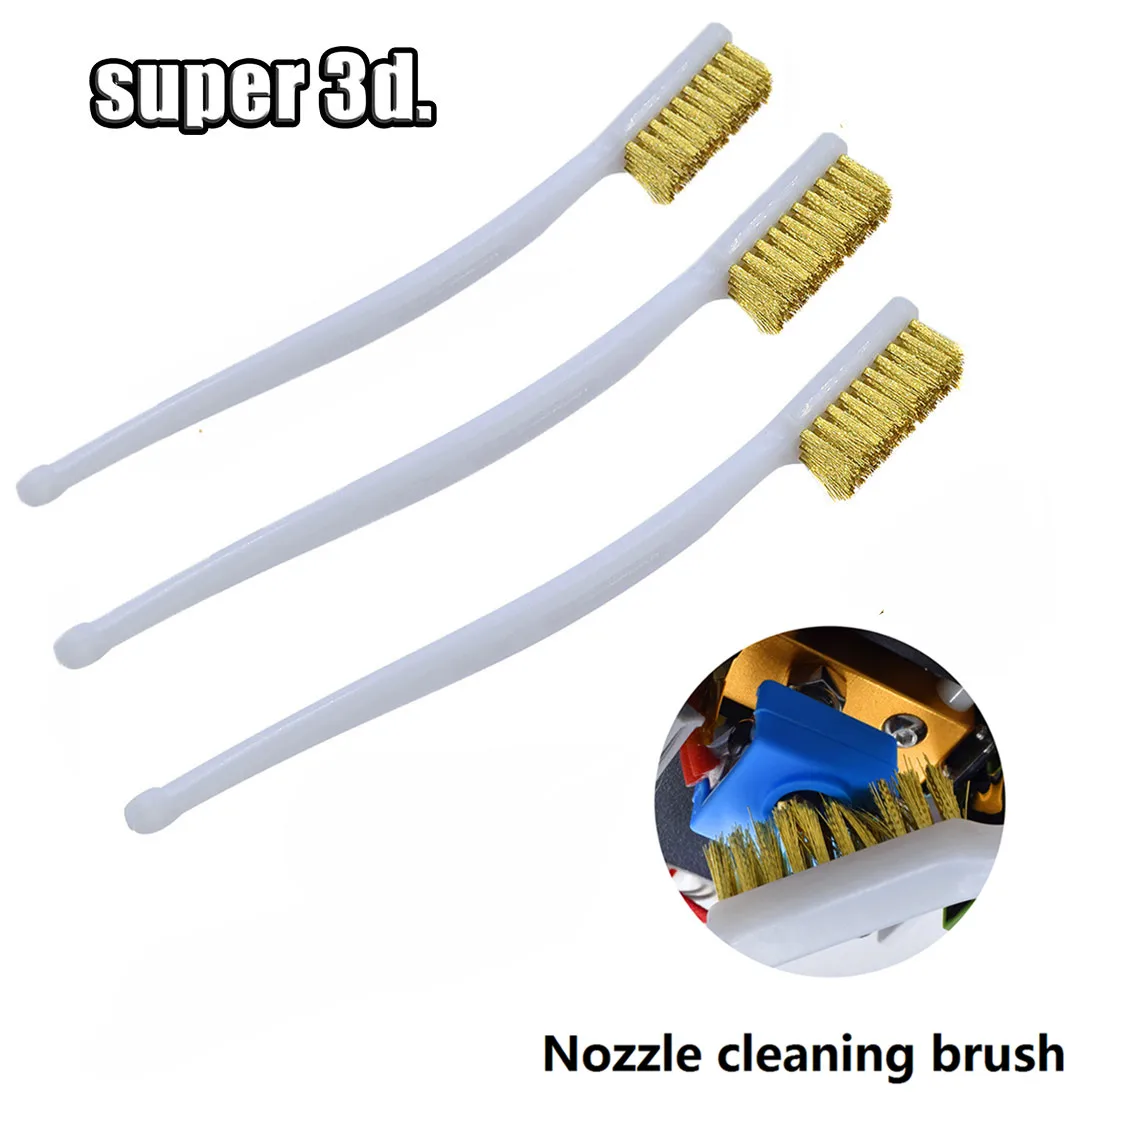 3D Printer Cleaner Tool Copper Wire Toothbrush Copper Brush Handle For Ender 3 Nozzle Heater Block Hotend Cleaning Hot Bed Parts